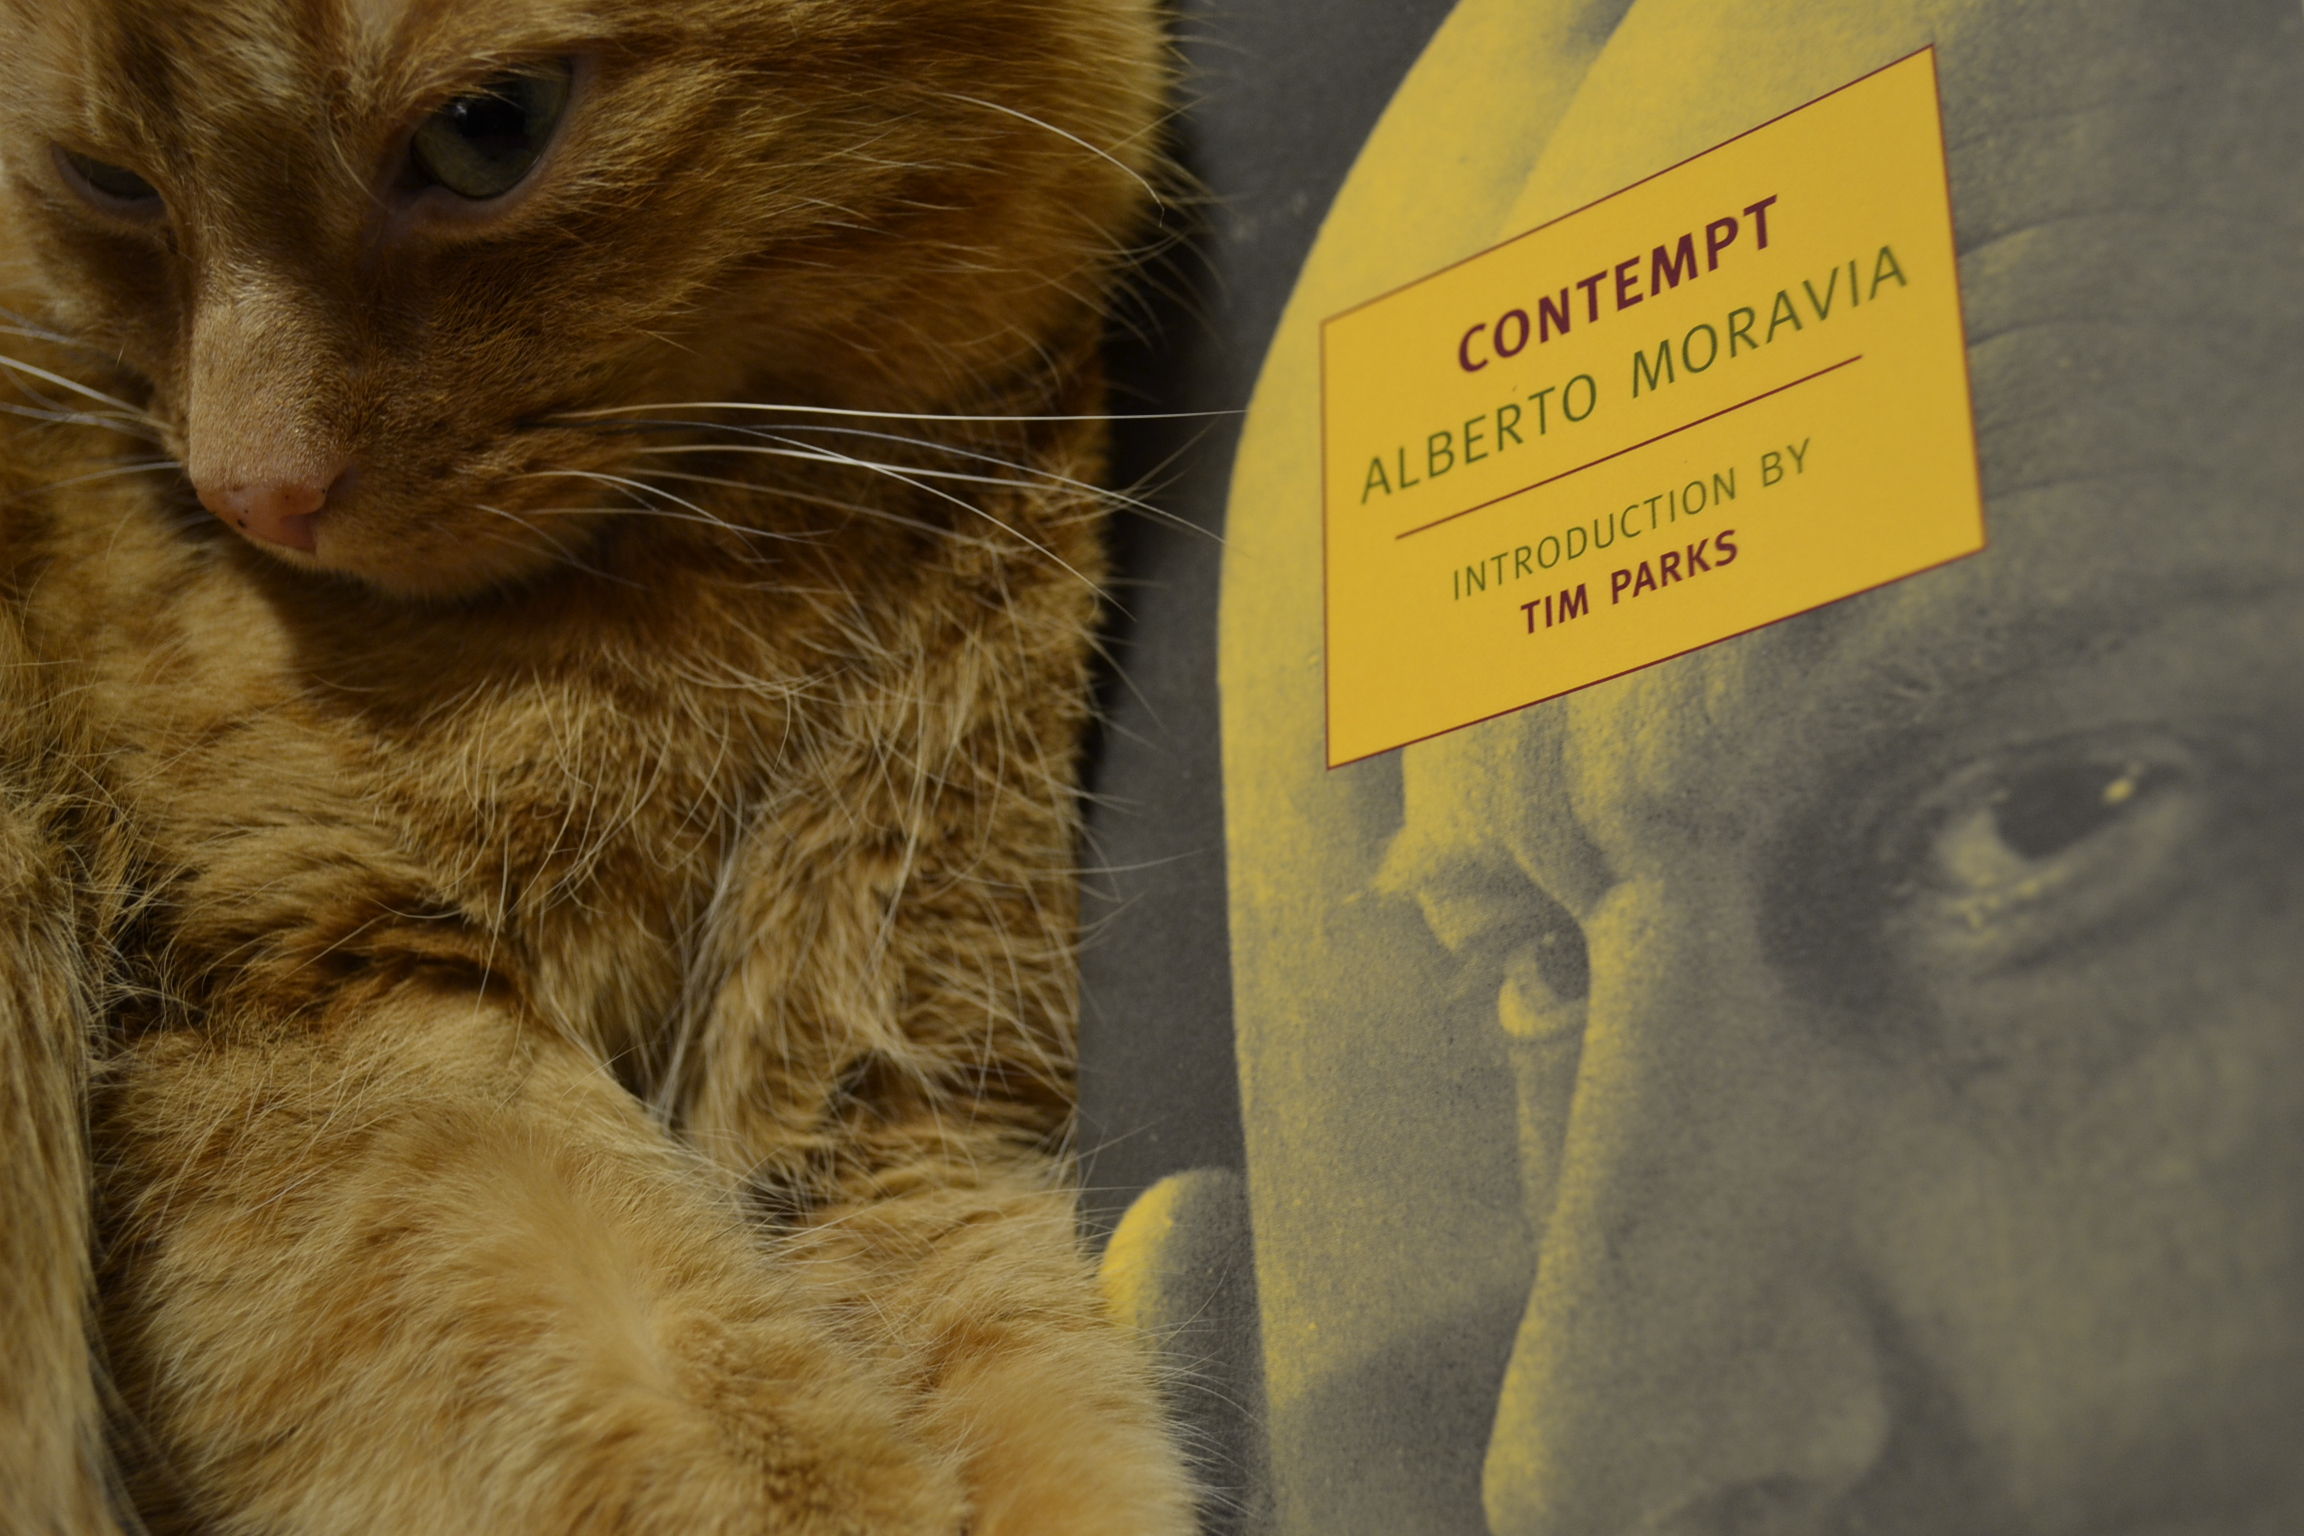 An orange cat looks contemptfully at the camera. Beside her is a yellow copy of Contempt.